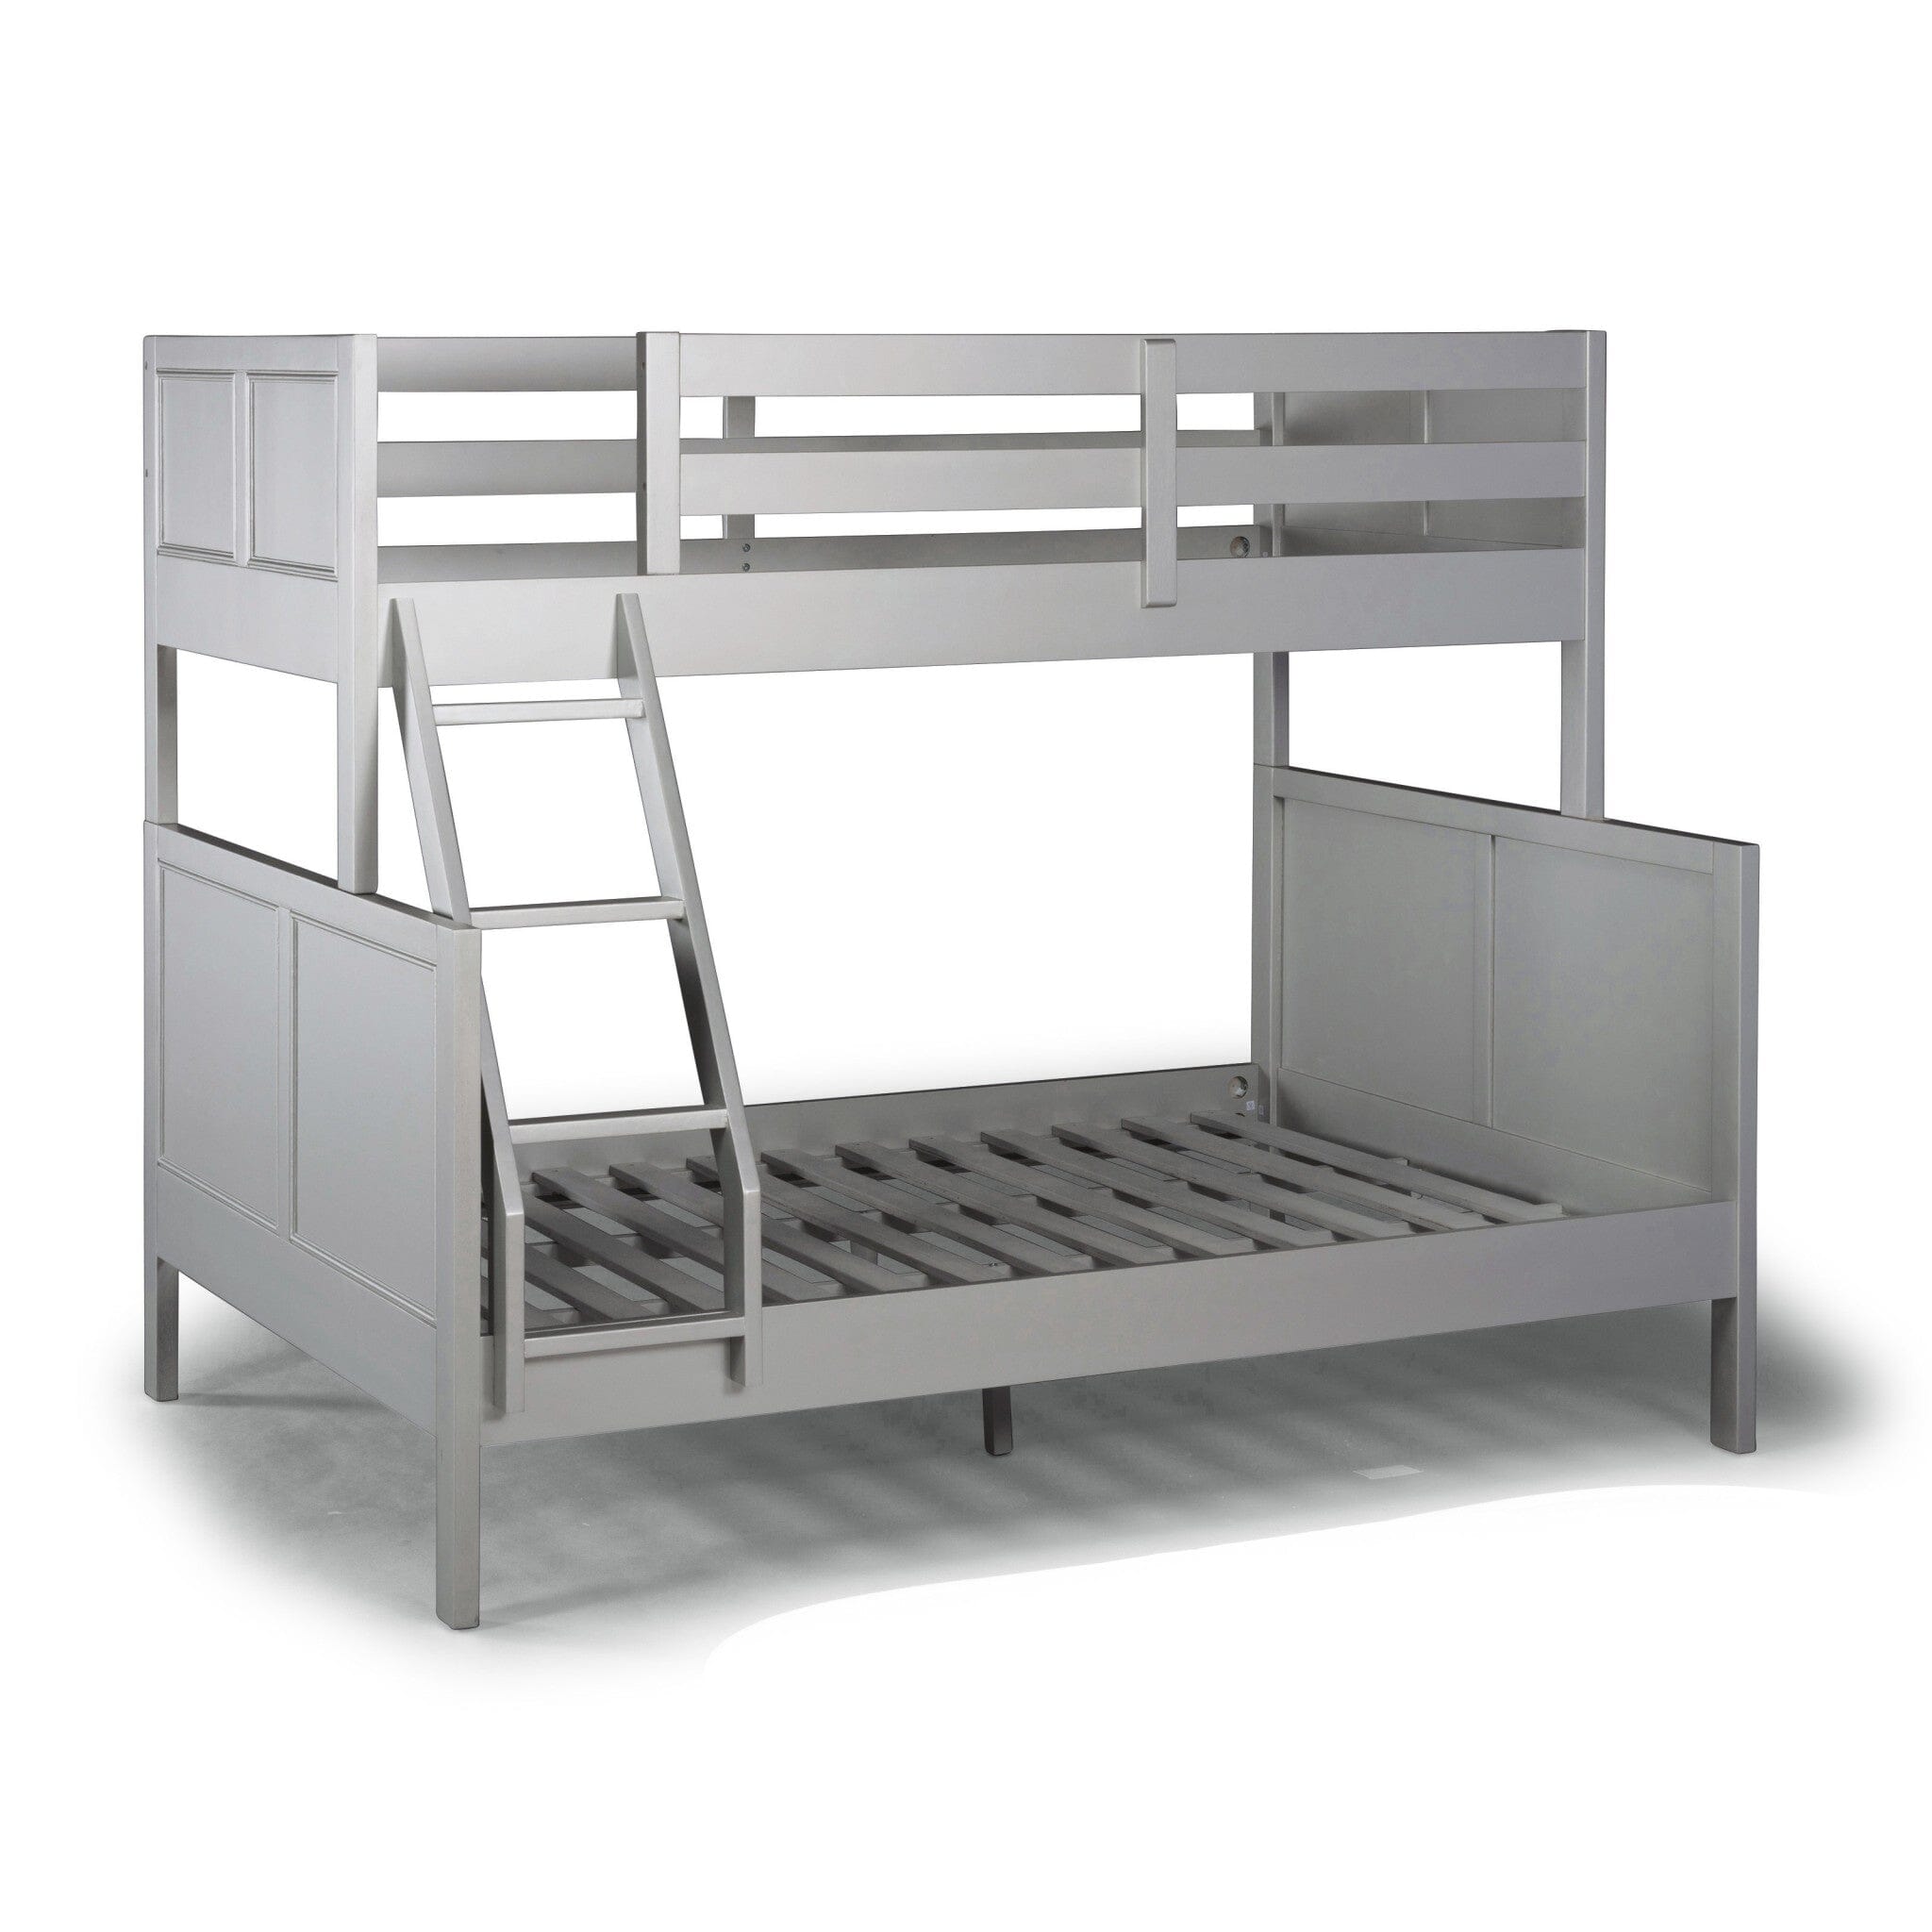 Transitional Twin Over Full Bunk Bed By Venice Bunk Bed Venice